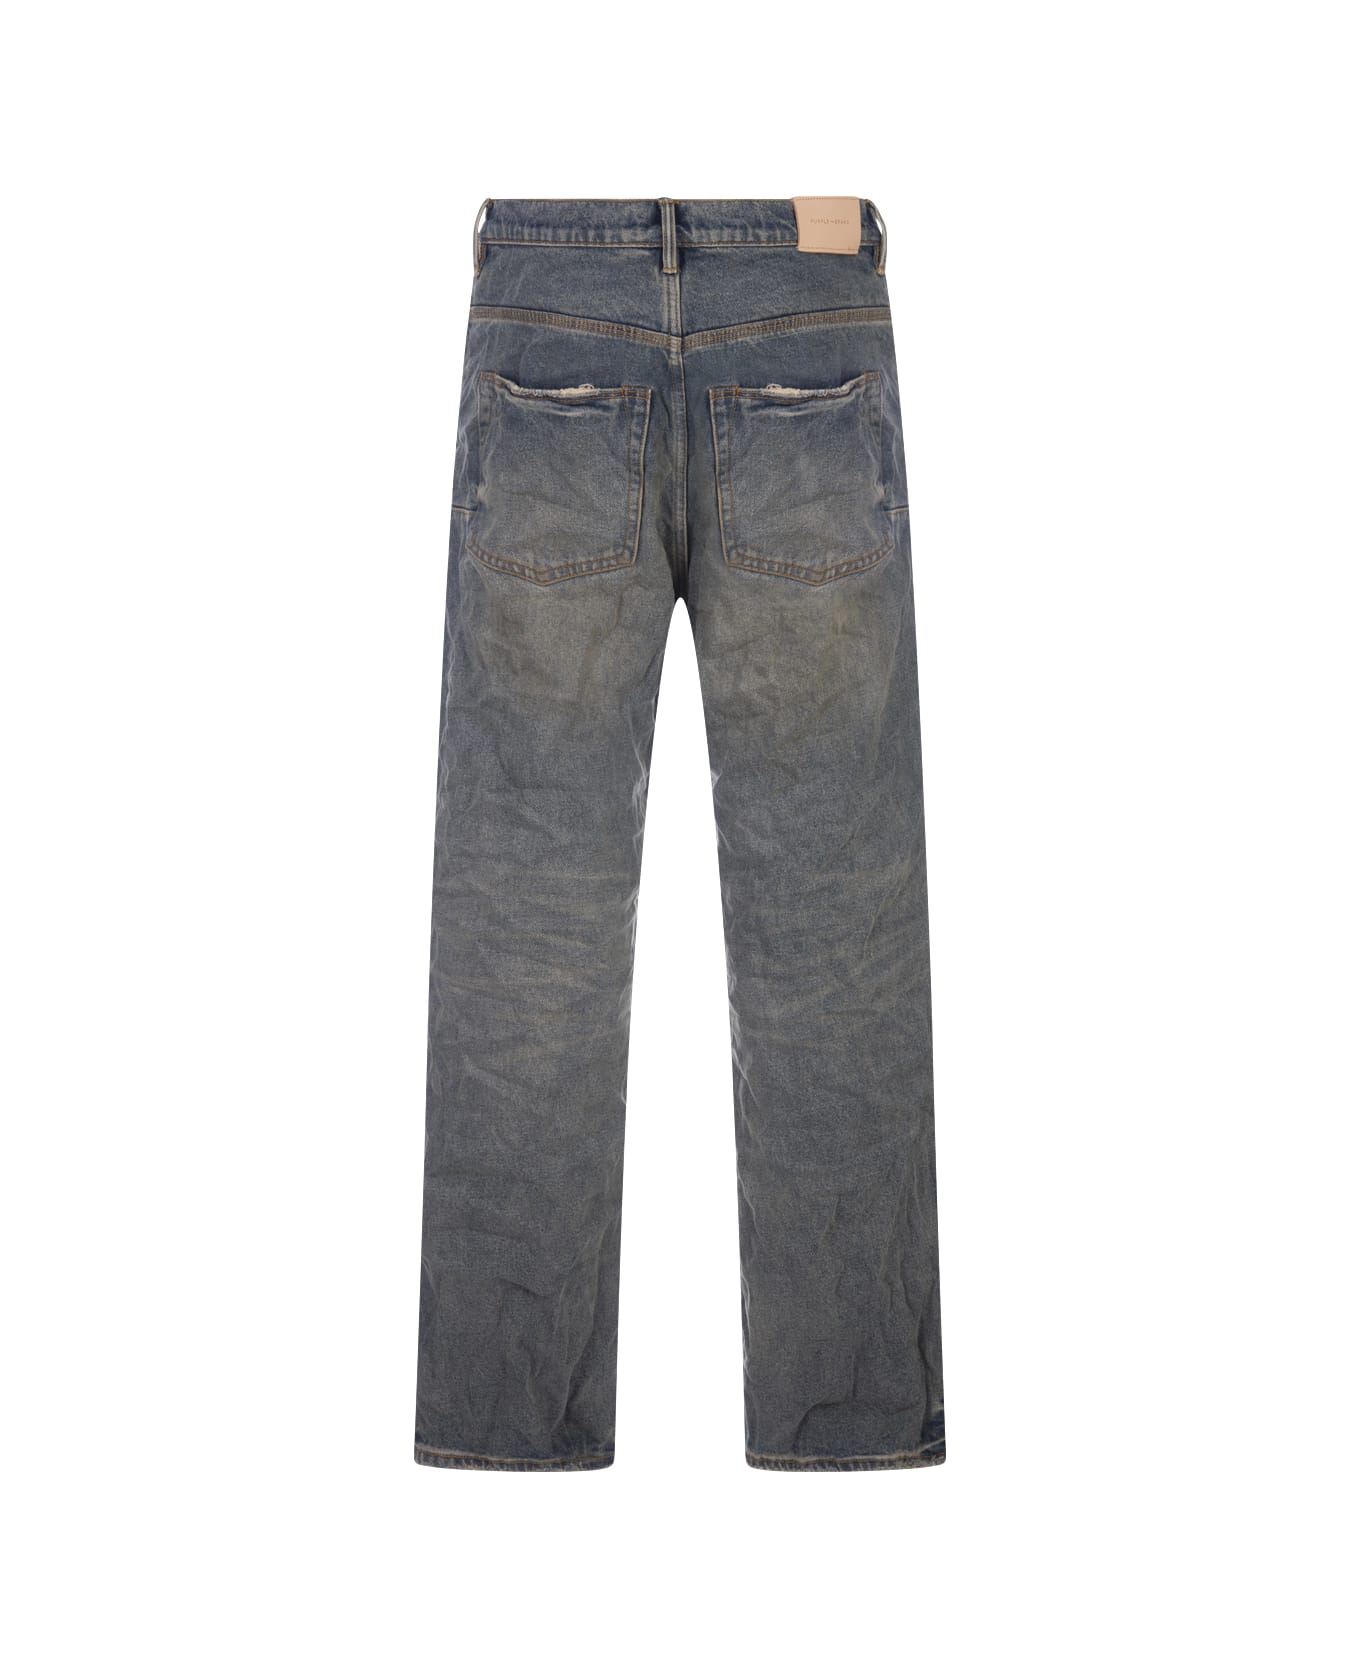 Purple Brand P018 Relaxed Vintage Dirty Jeans In Light Indigo - Blue